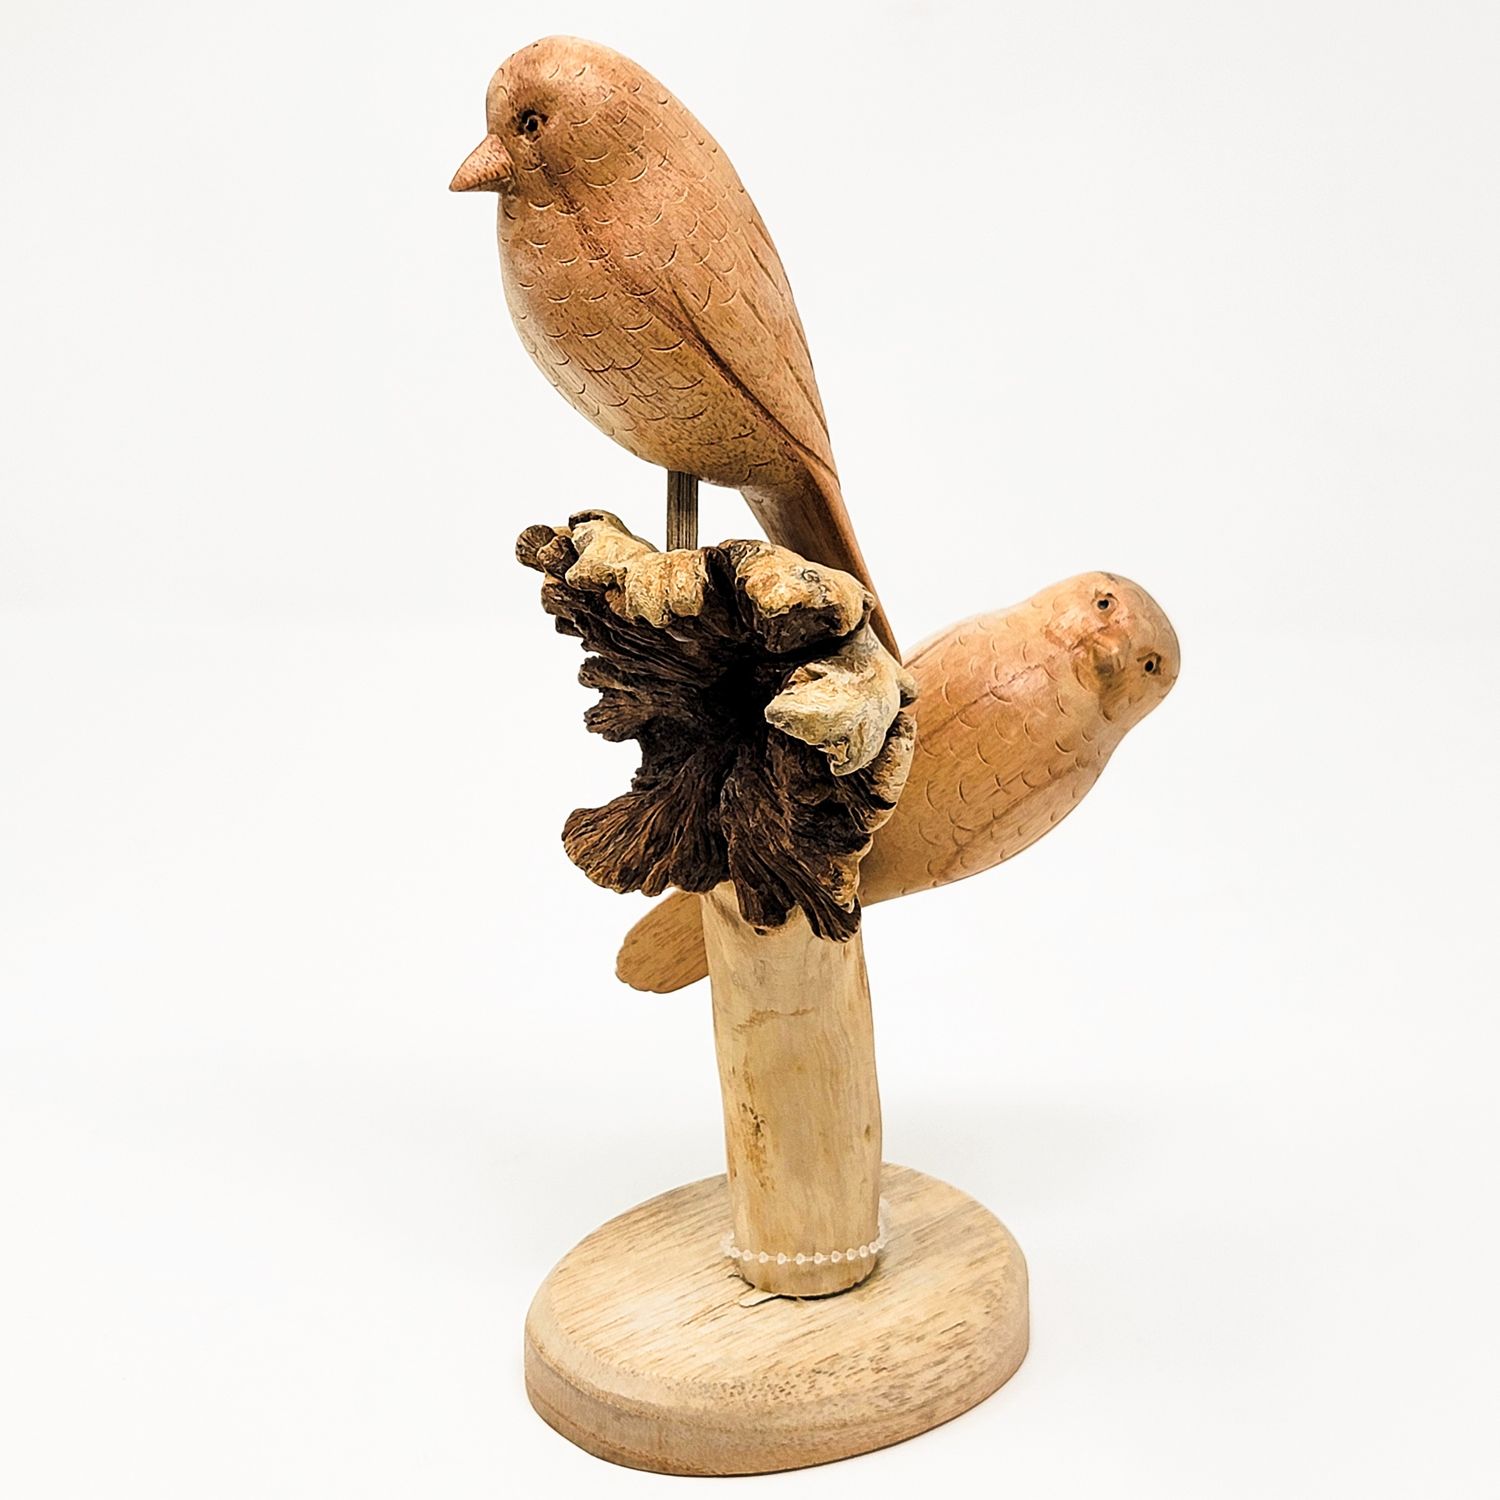 COLD PUFFY BIRDS PAIR STATUE HAND CARVED IN SUAR HARDWOOD ON PARASITE WOOD BASE 2357, Item #: 2357, Alternate Lookup: CMQ5-563, Vendor Stock #: TIN 616 8in 20cm